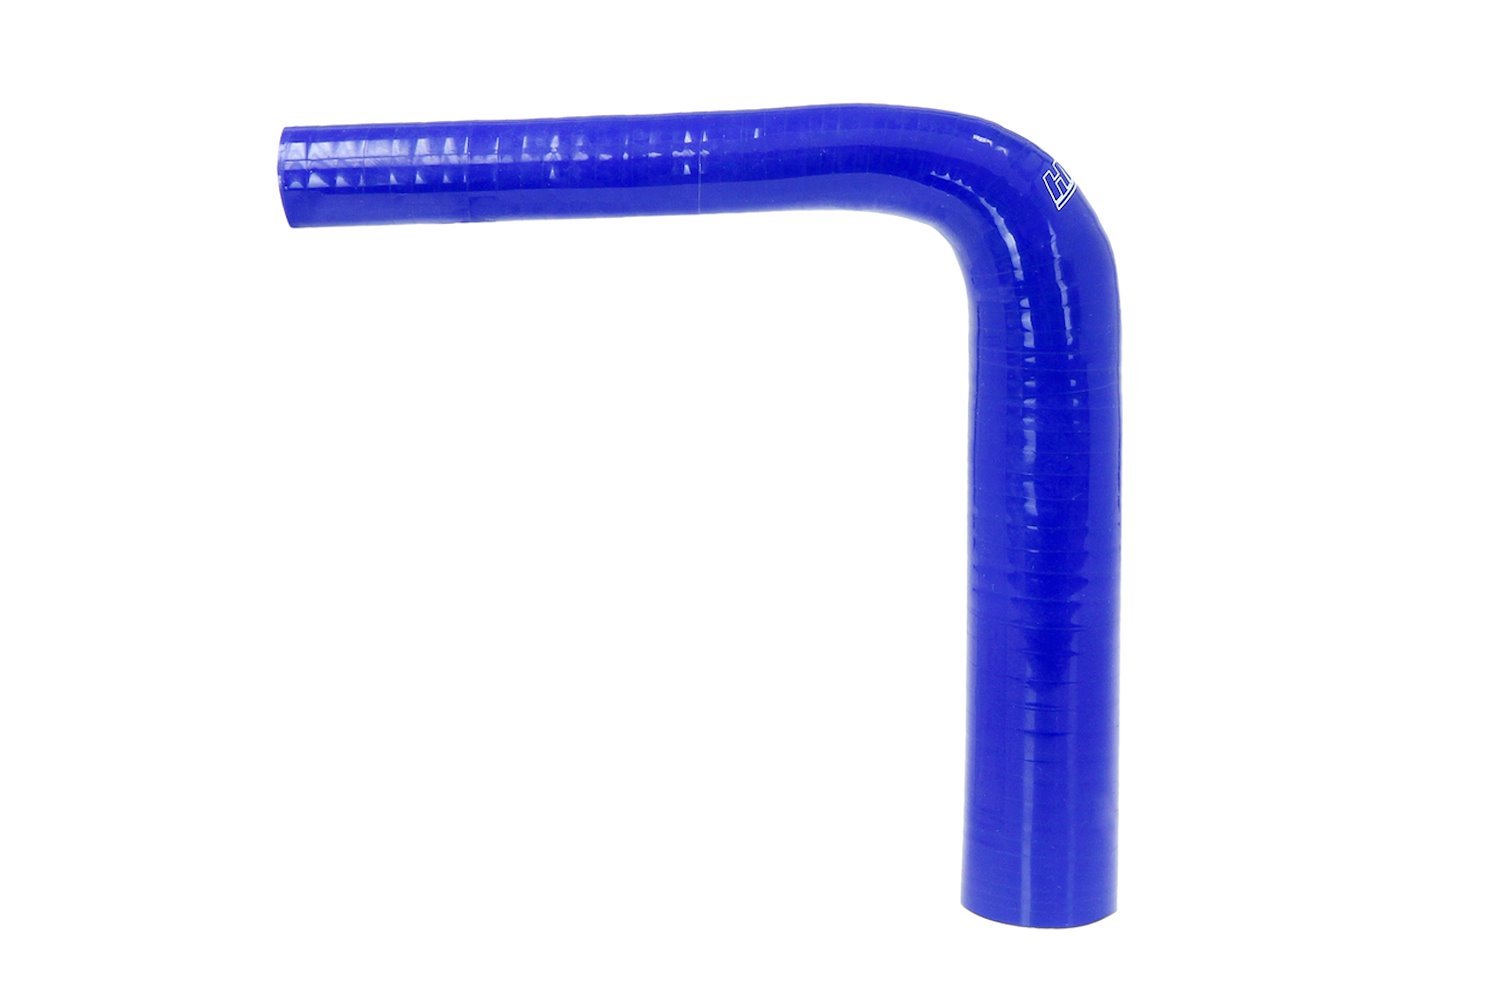 HTSER90-087-138-BLUE Silicone 90-Degree Elbow Hose, High-Temp 4-Ply Reinforced, 7/8 in. - 1-3/8 in. ID, Blue